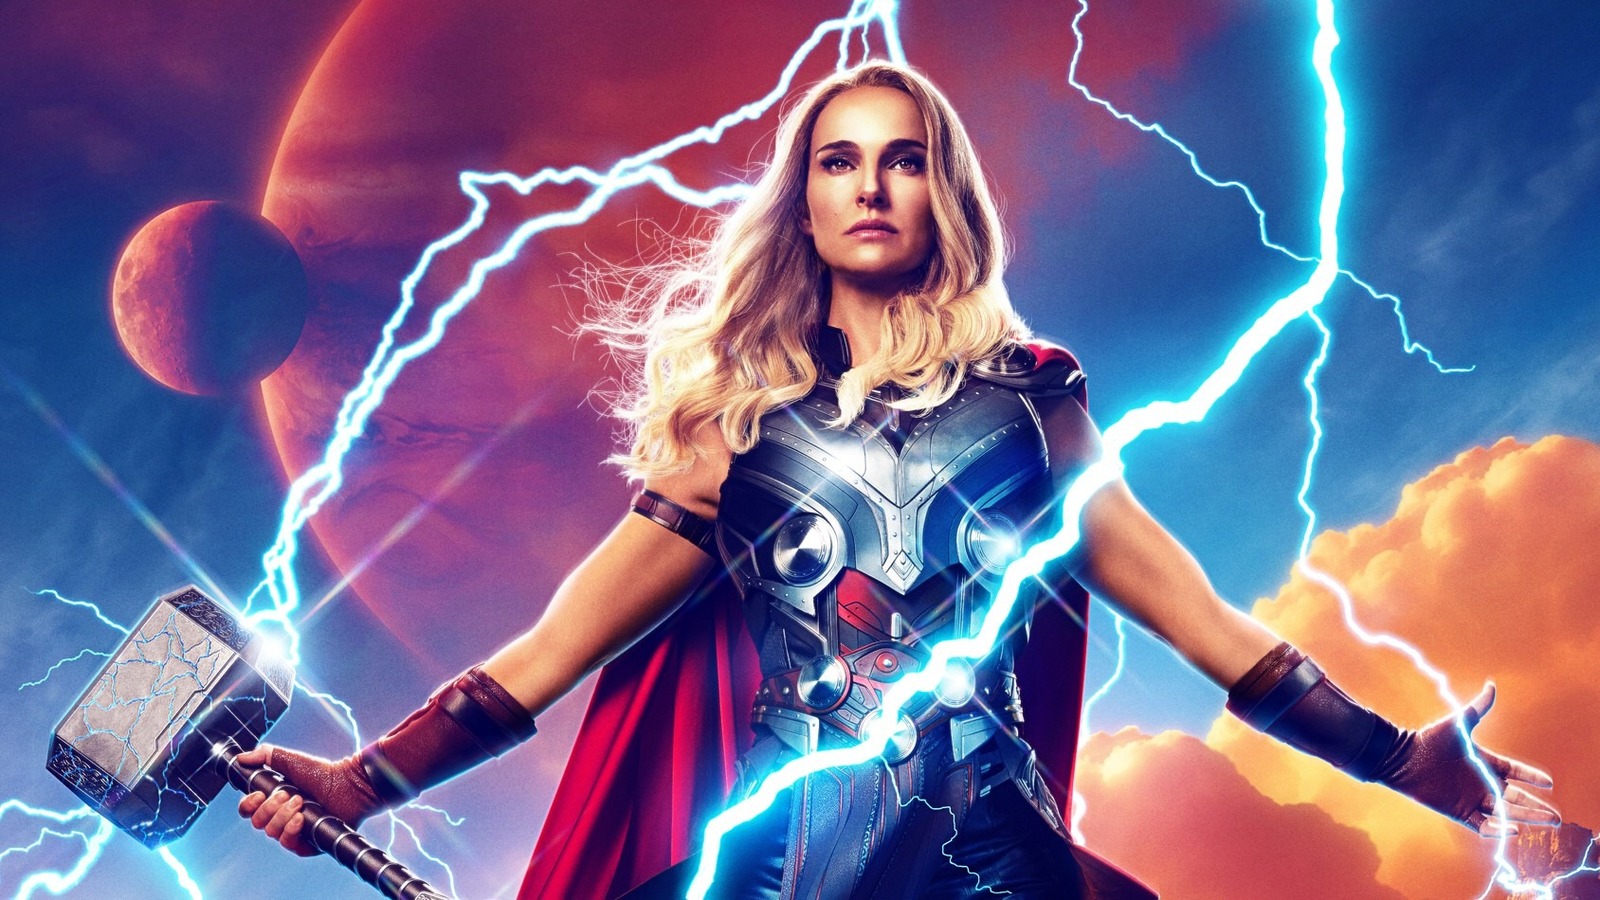 Thor: Love and Thunder Mid- and Post-Credit Scenes Explained - Tech Advisor